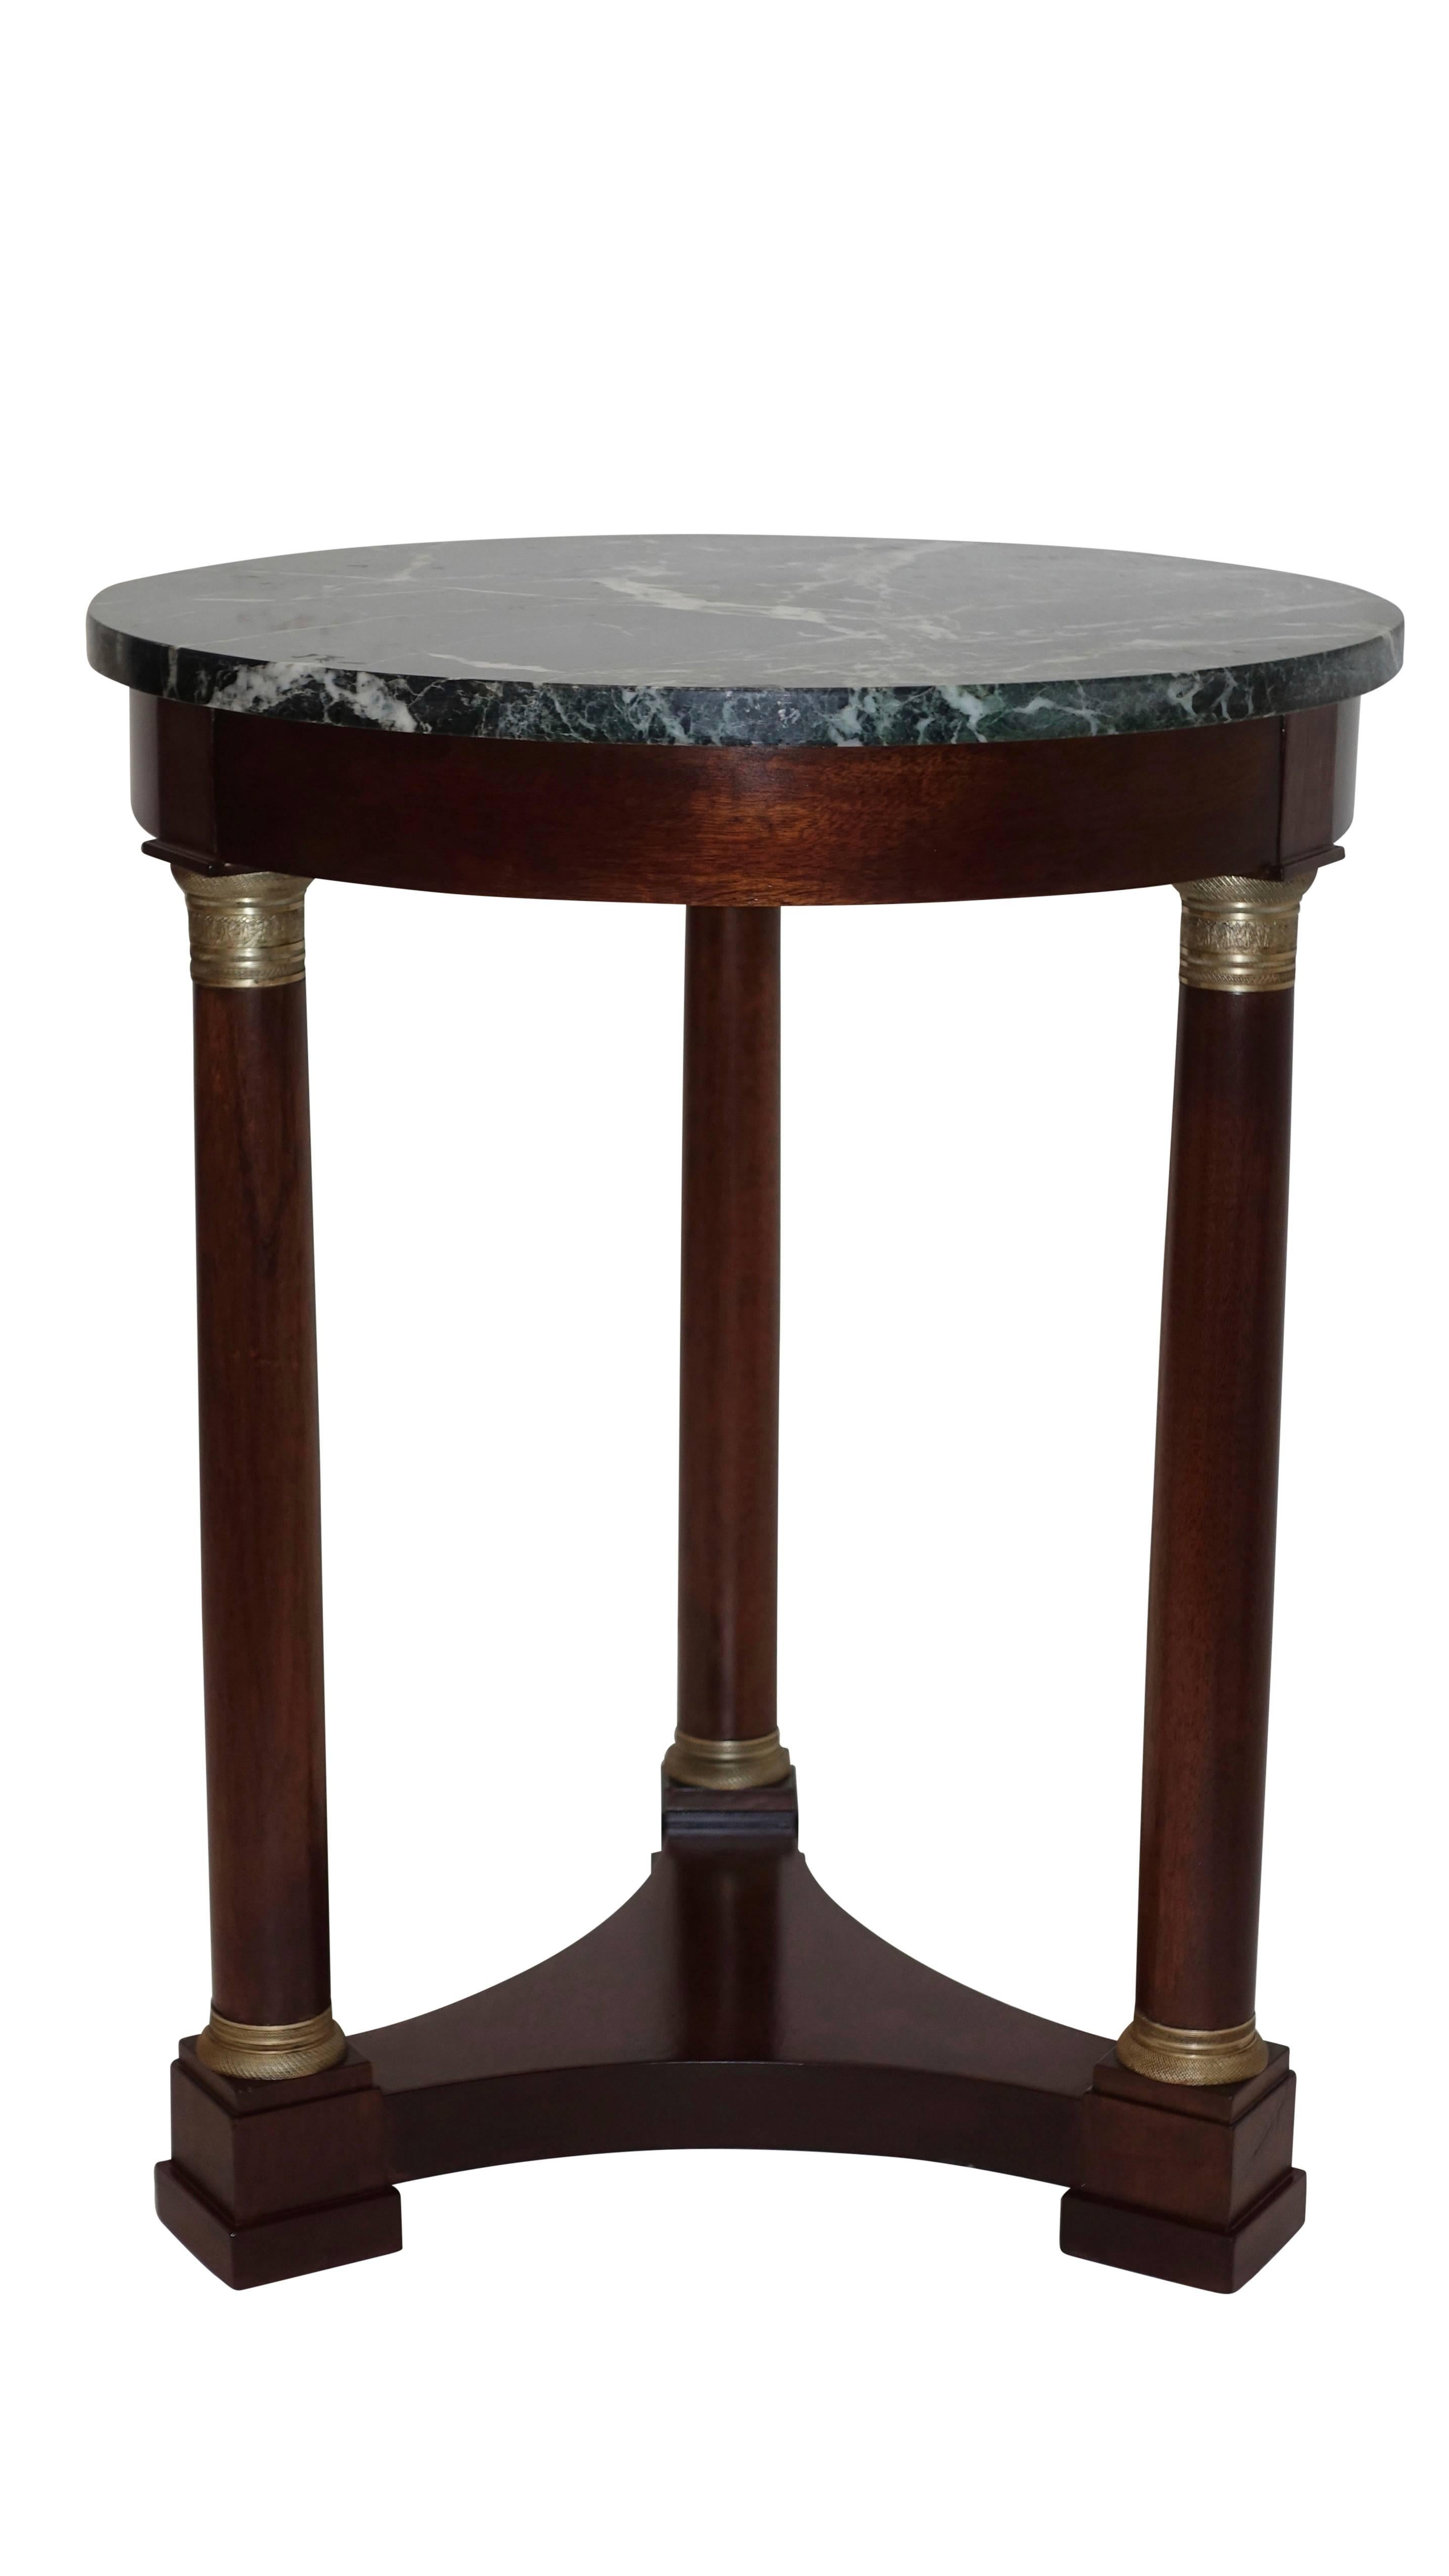 20th Century Empire Style Mahogany Side Table with Marble Top and Brass Mounts